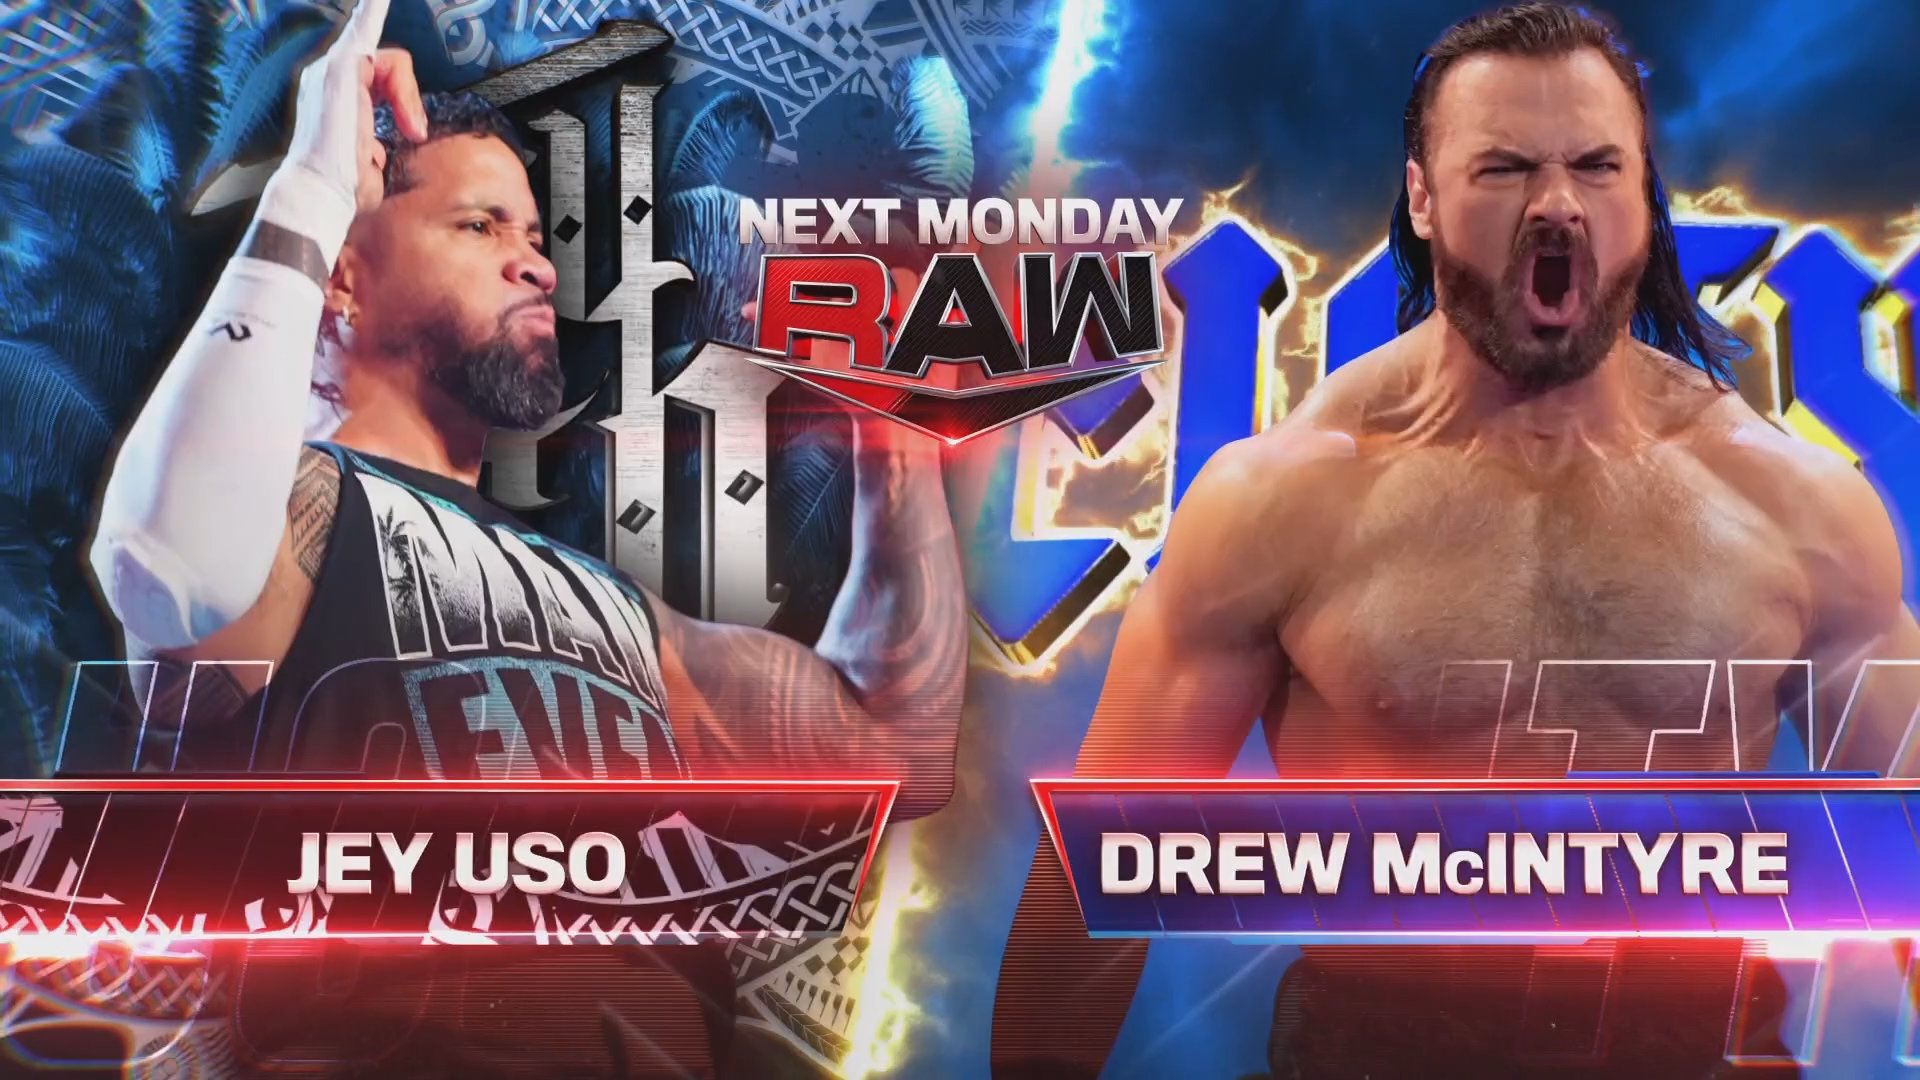 A match graphic for WWE Raw.